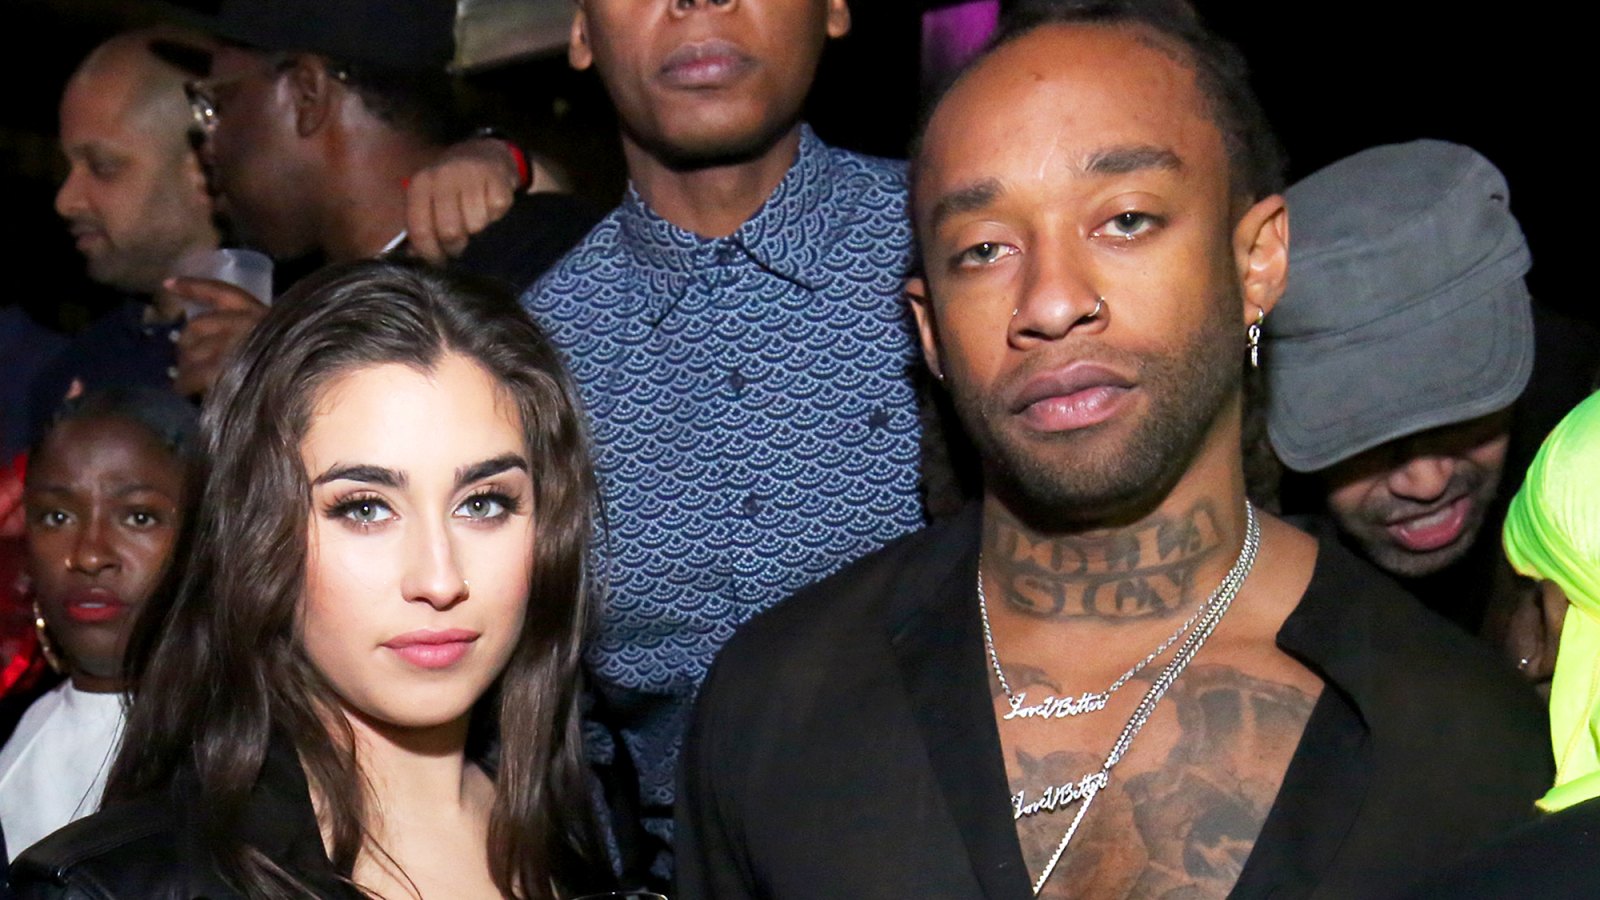 Lauren Jauregui and Ty Dolla Sign attend the official SS18 FENTY PUMA afterparty at Magic Hour Rooftop Bar & Lounge on September 10, 2017 in New York City.